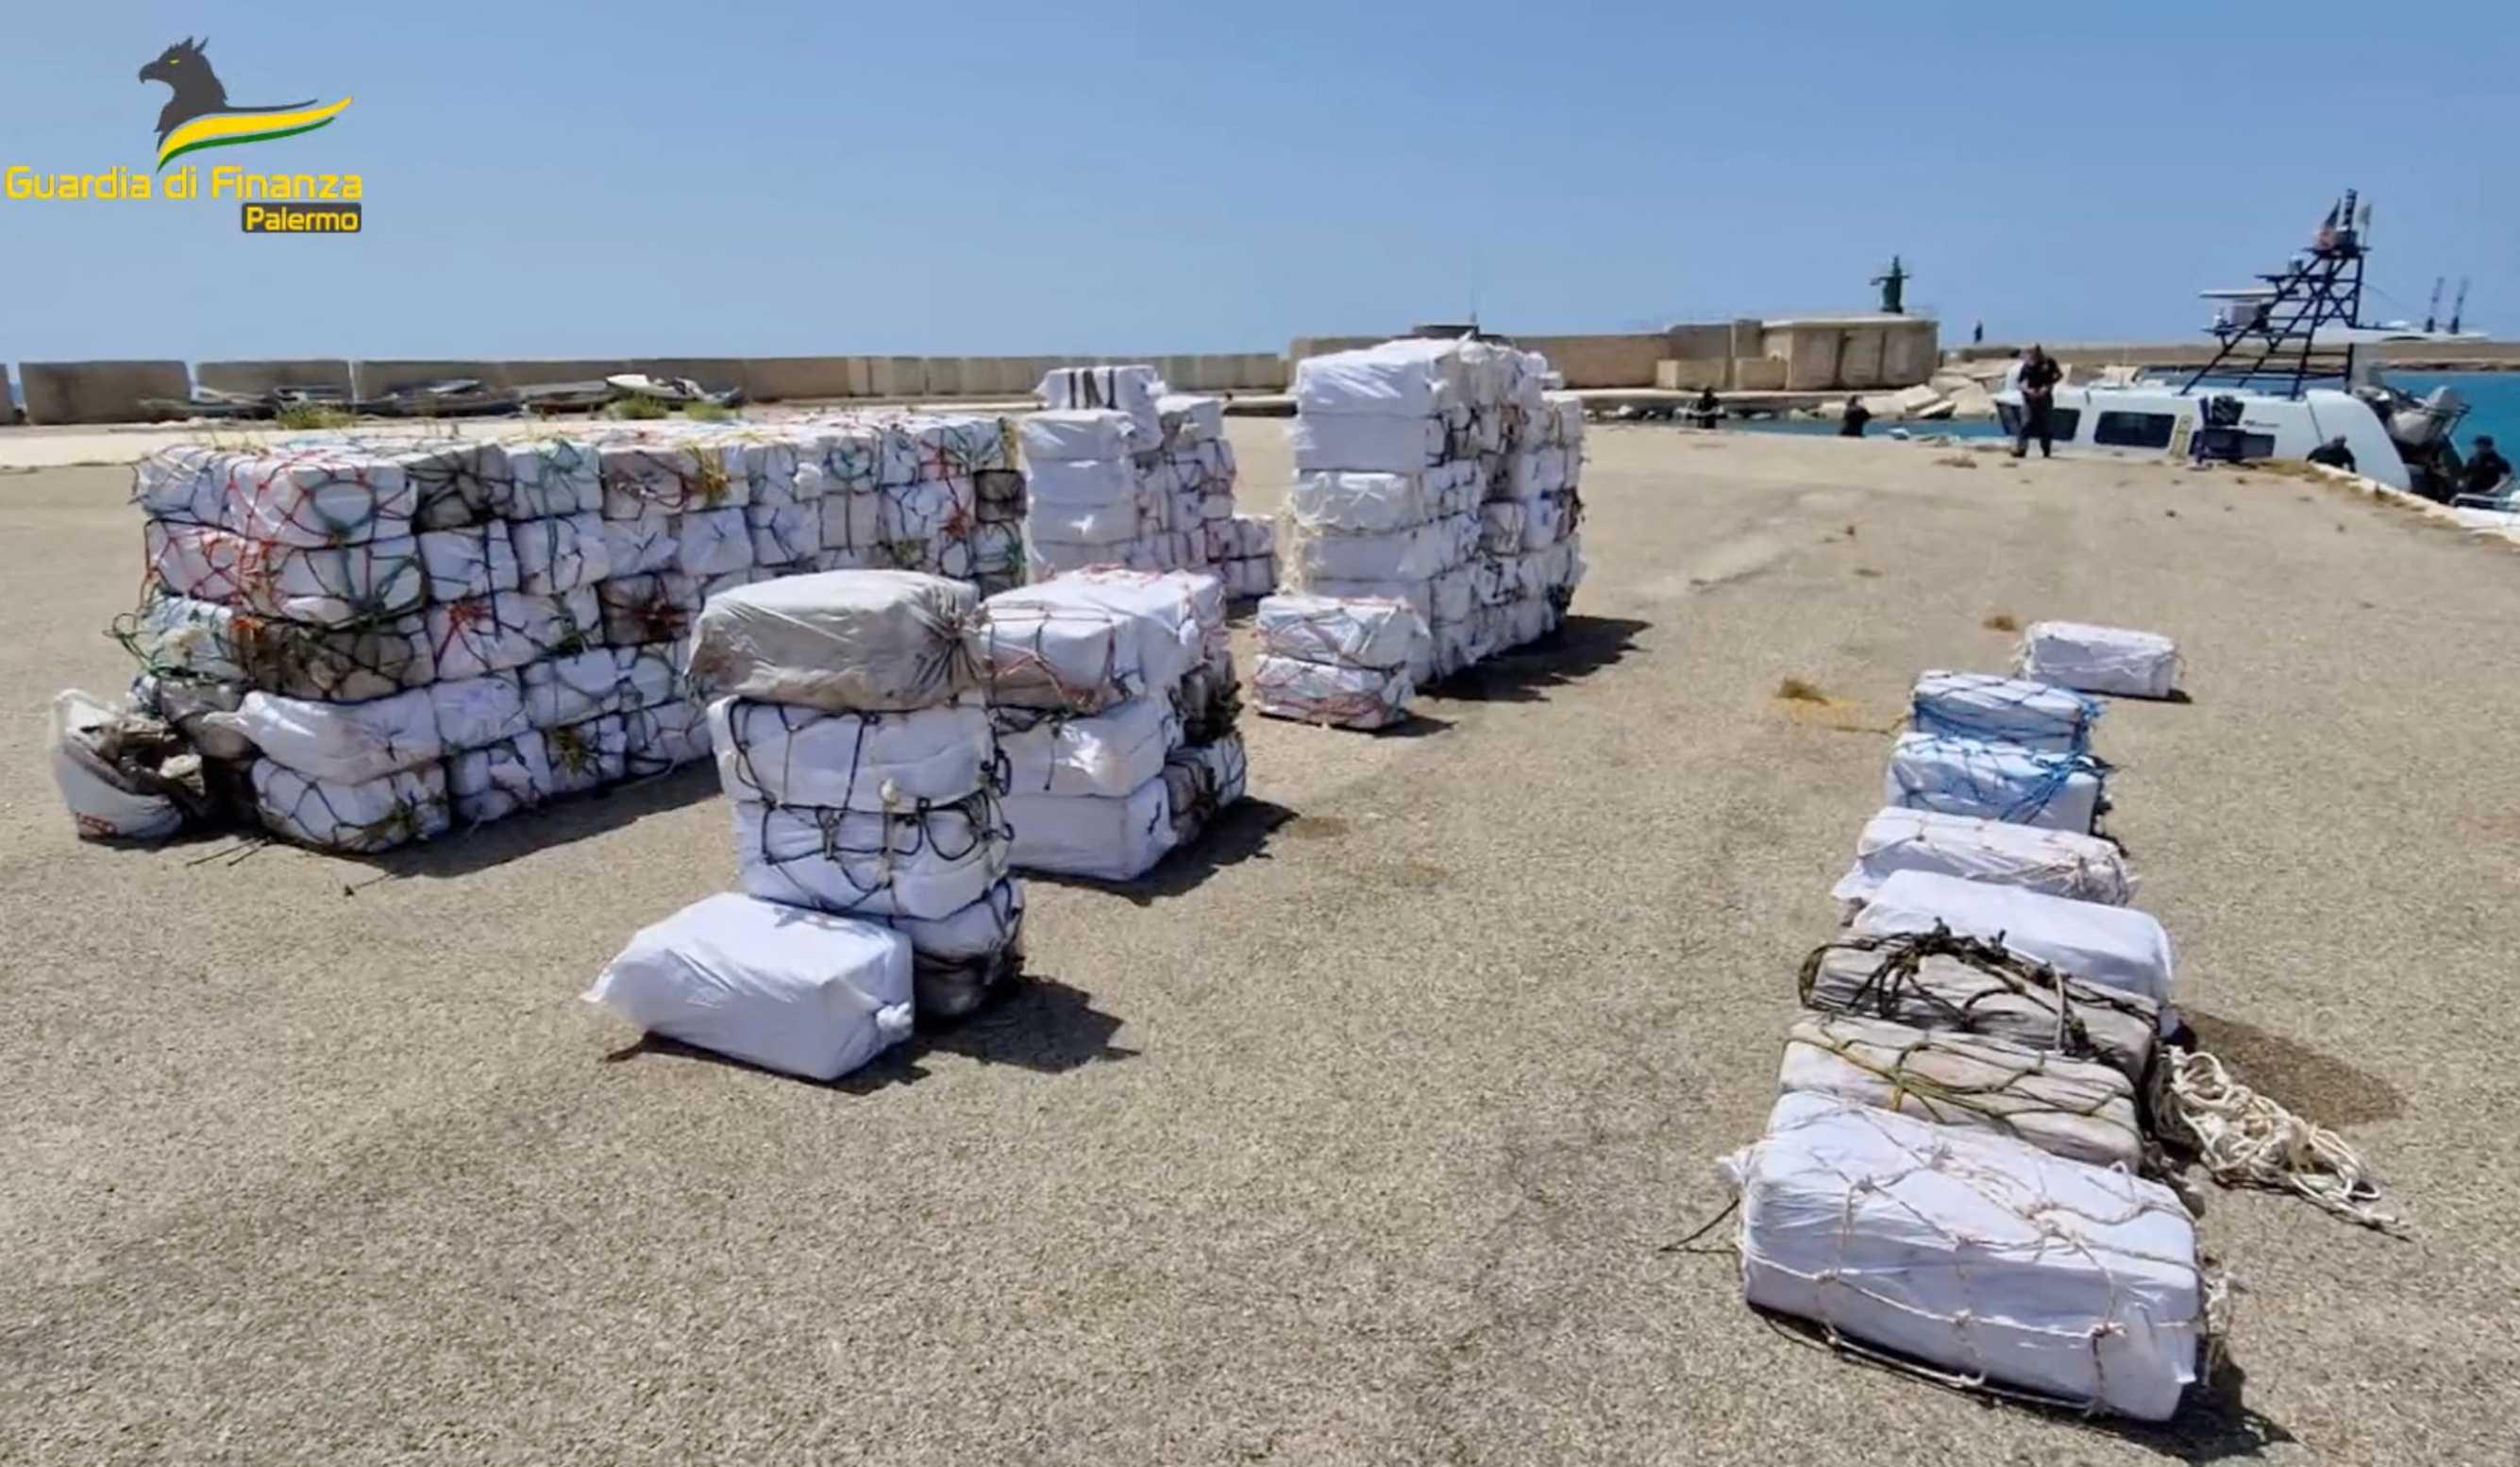 Packages containing cocaine seized during a police operation, lie on a dock in the harbour of Porto Empedocle, Italy July 21. Photo: Reuters